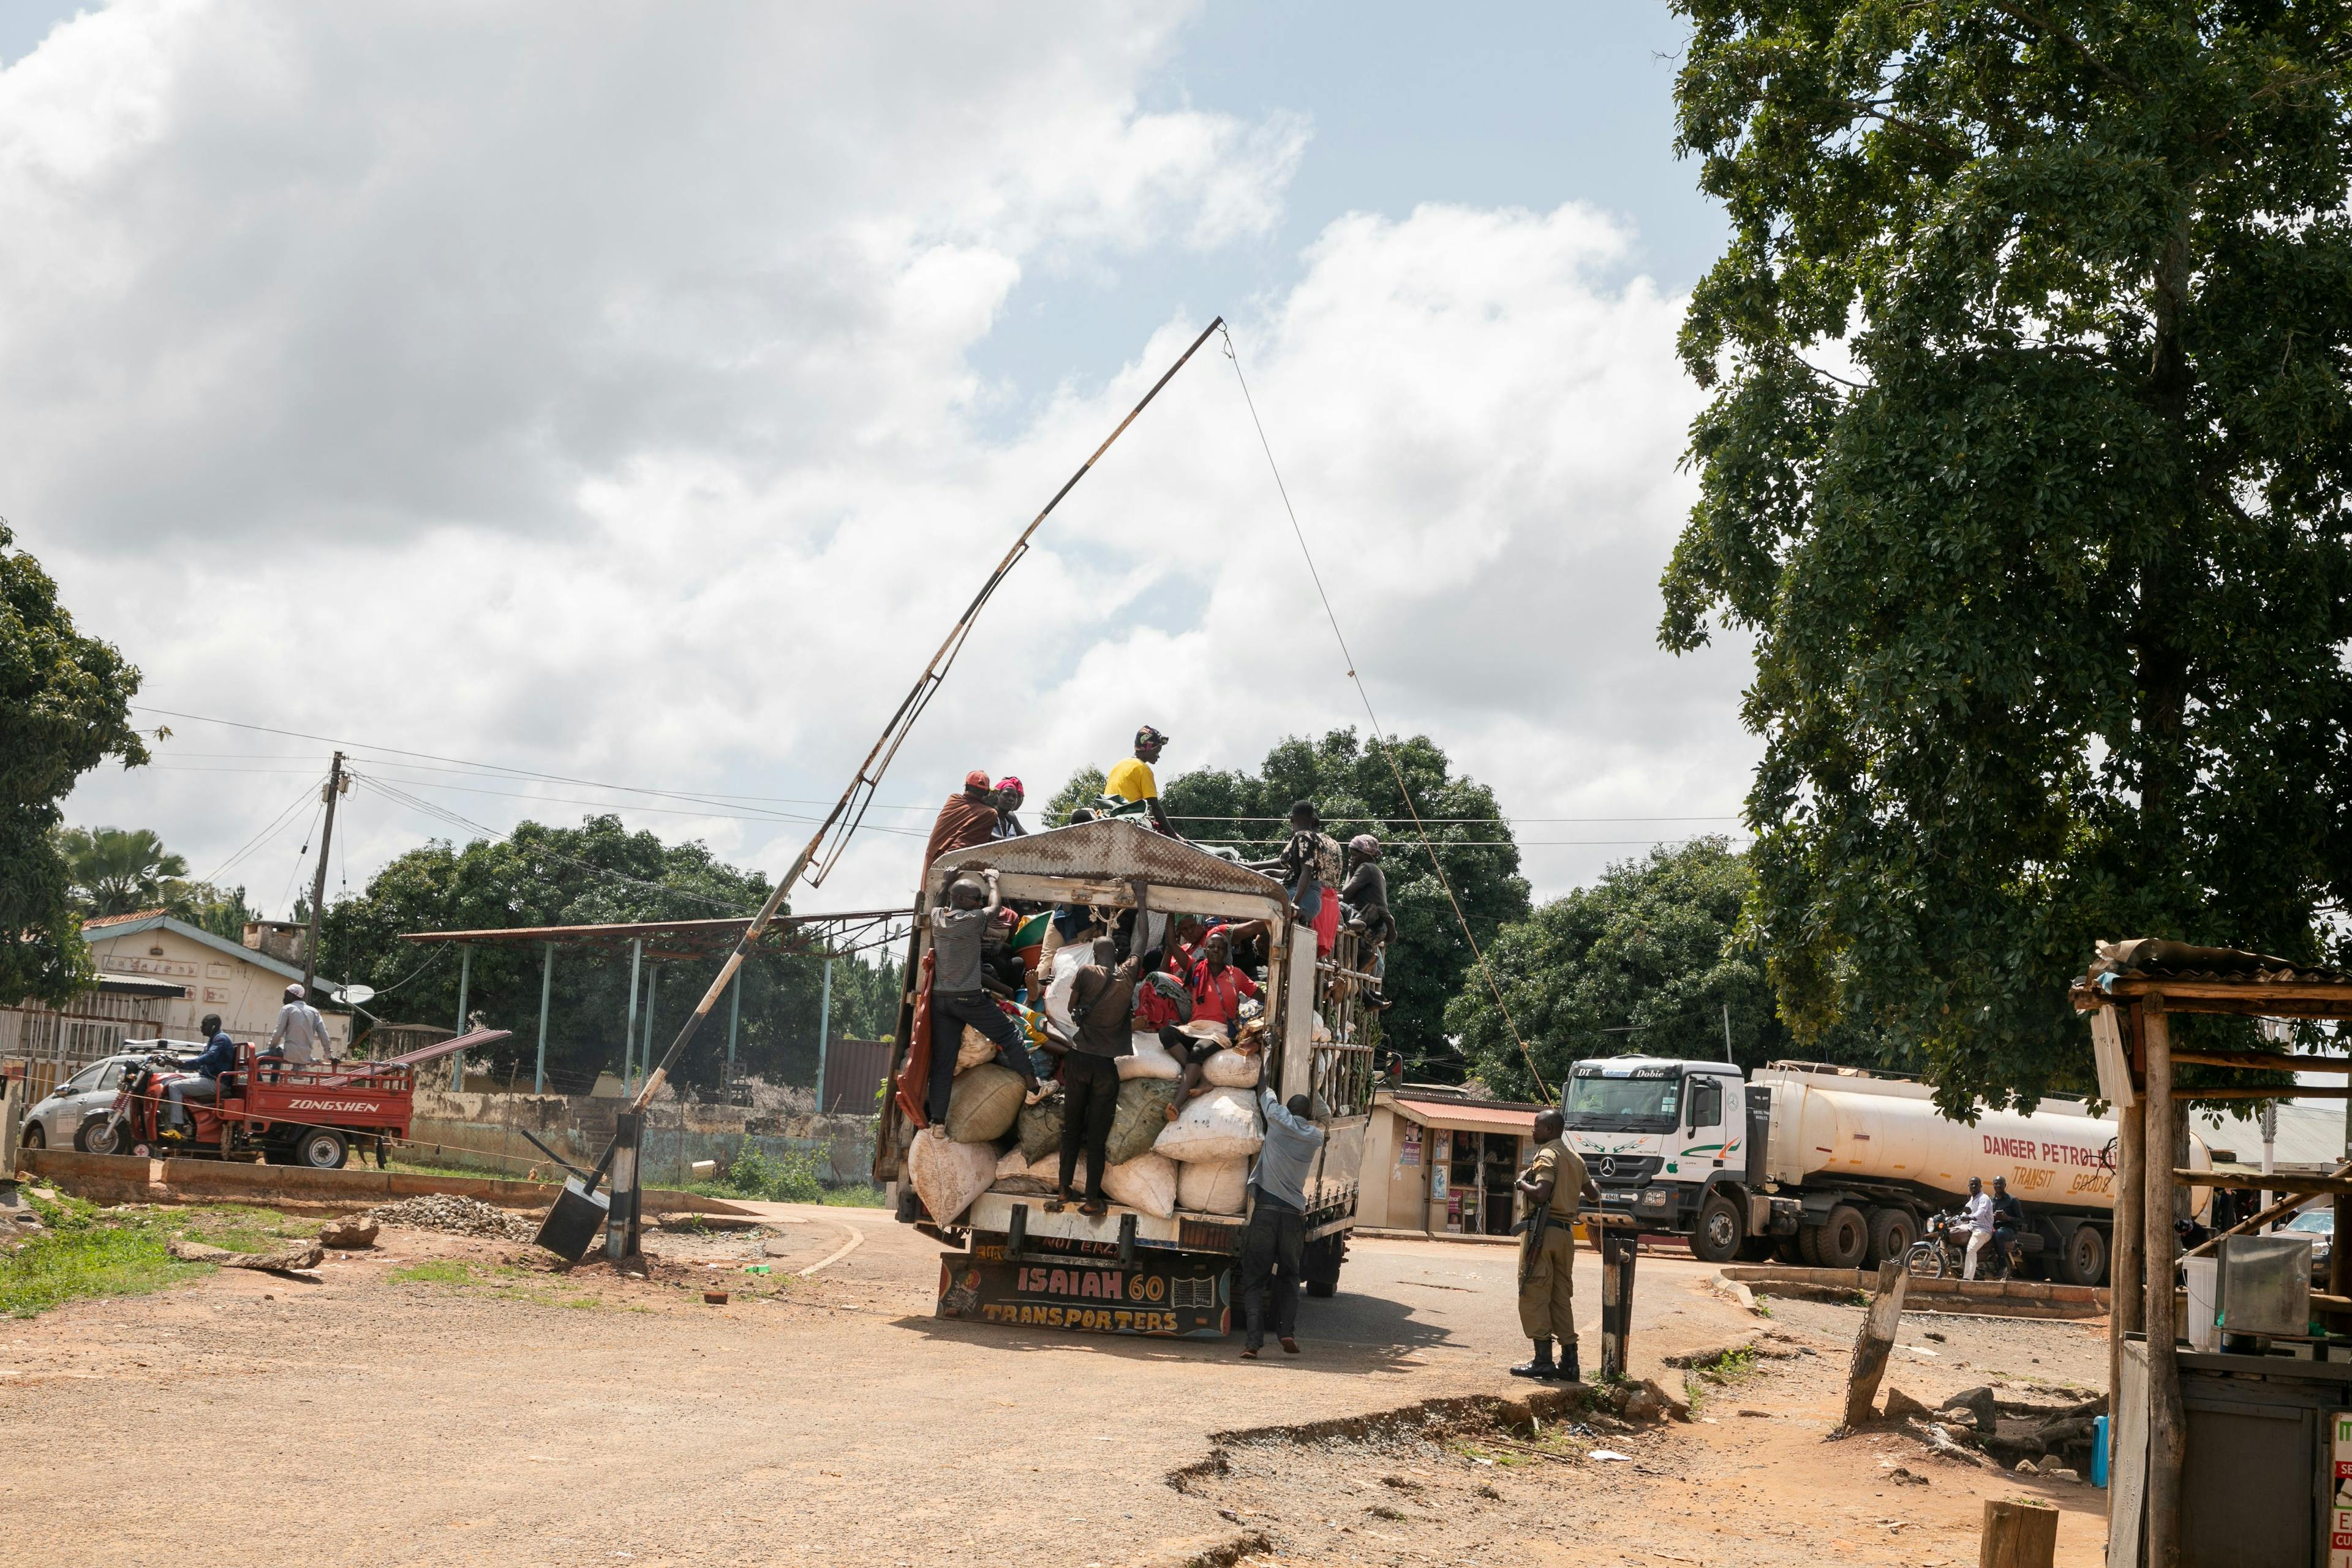 Trucks crossing at the border between the DRC and Uganda are loaded with stock for trading in local markets. Trade links that connect communities across national boundaries are the lifeblood of many border areas.